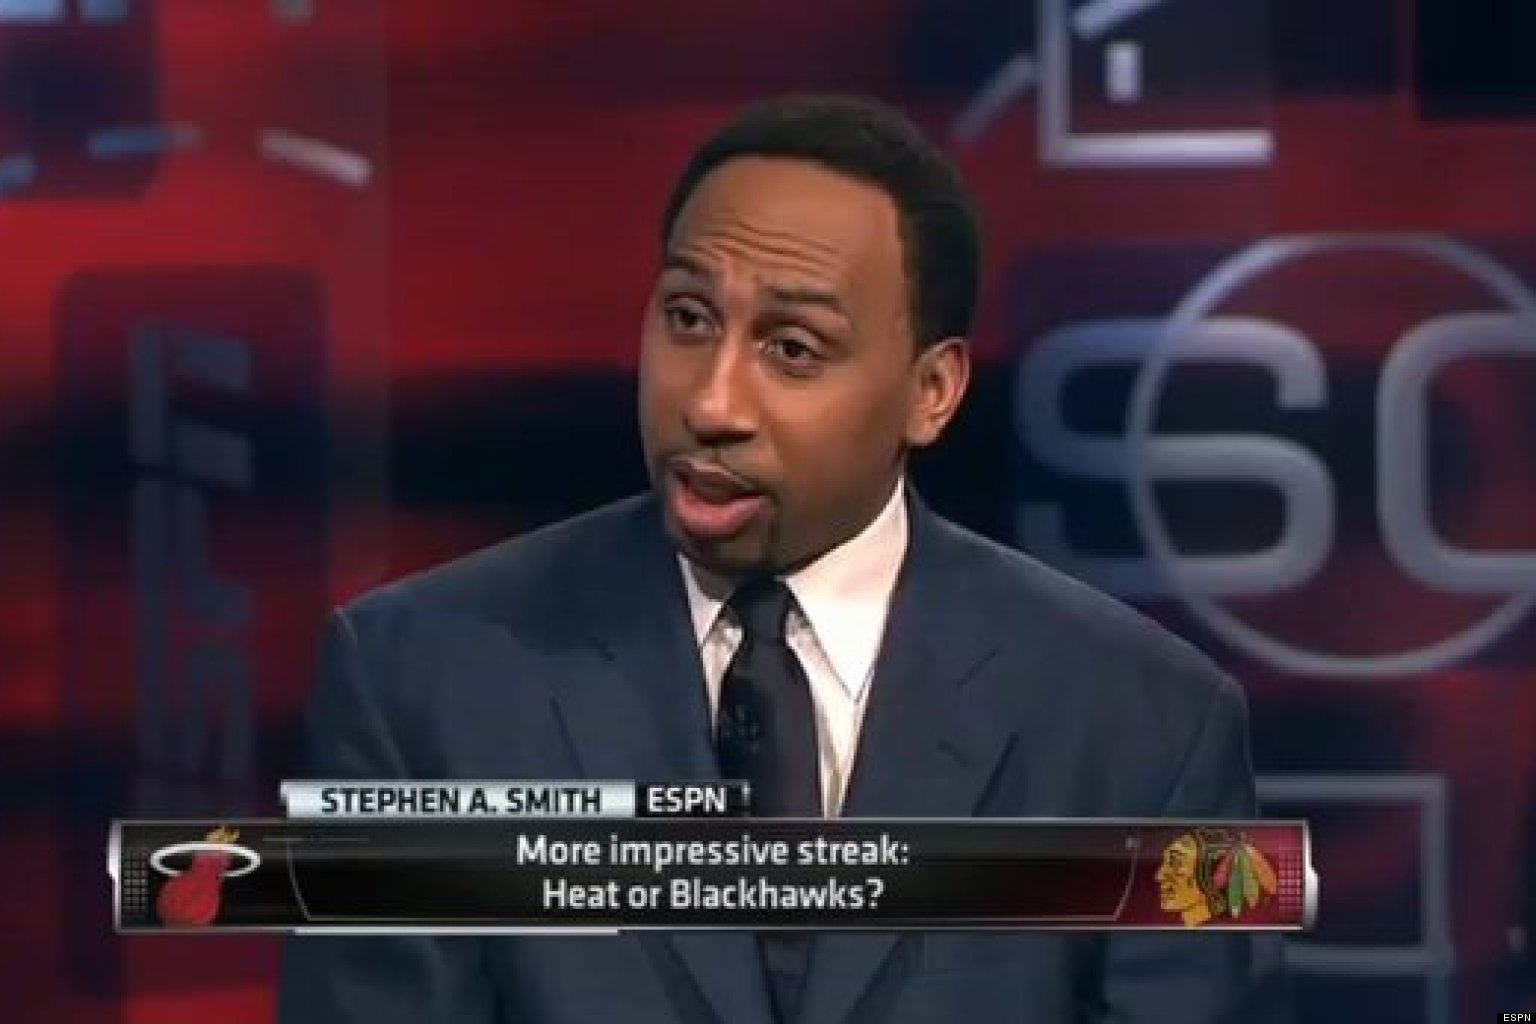 Stephen A. Smith Hockey Rant: ESPN Personality Says 'I'm Not Into The ...